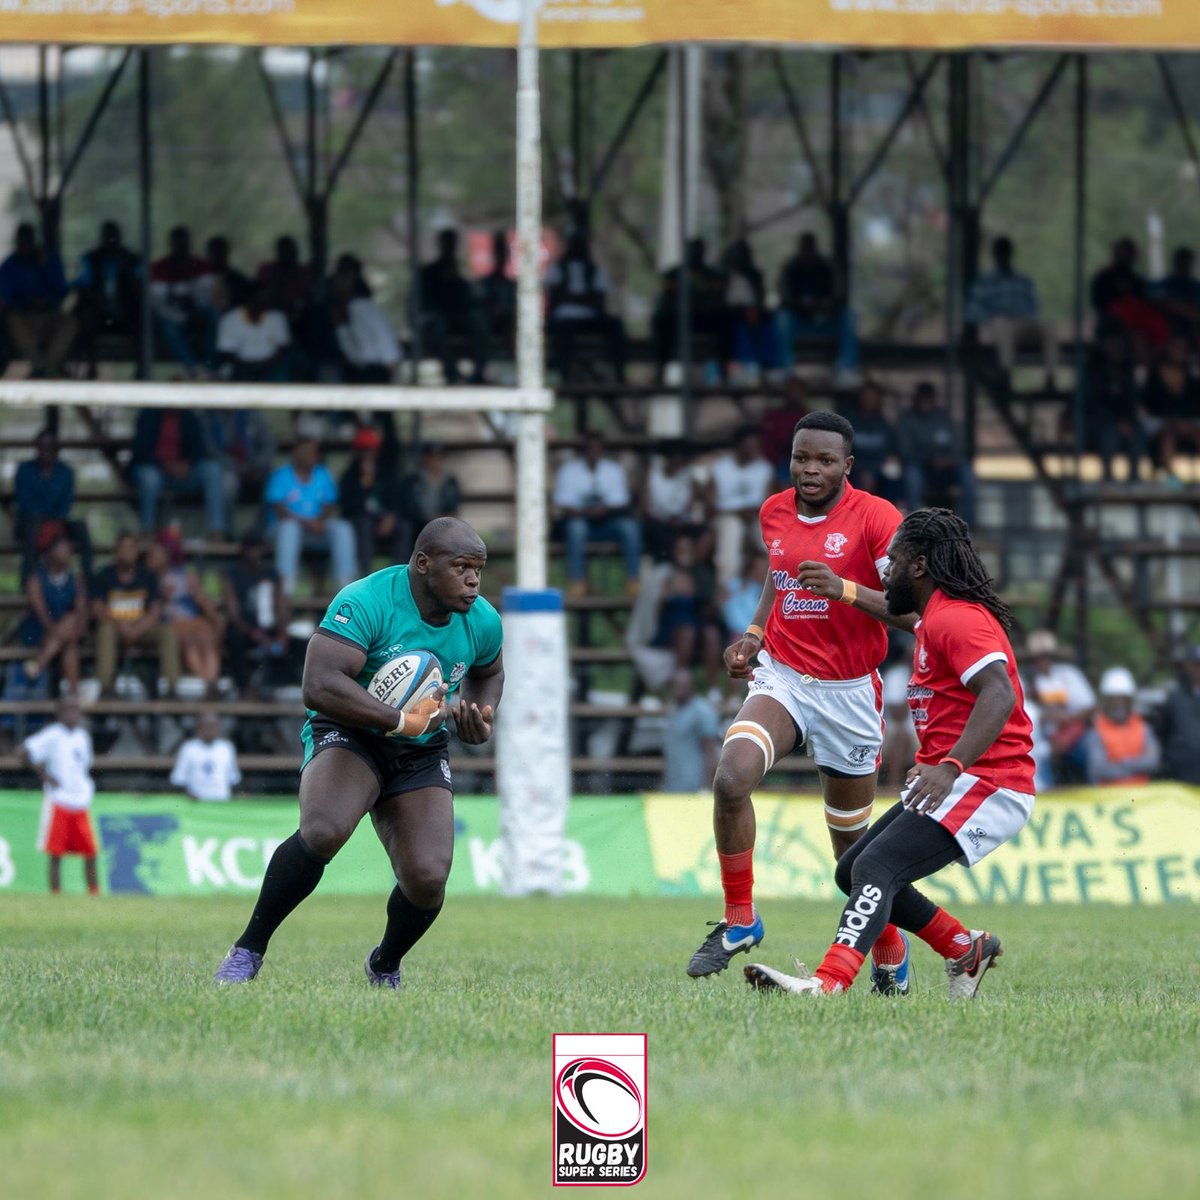 Y'all should see the aftermath of this.

#RugbyKE